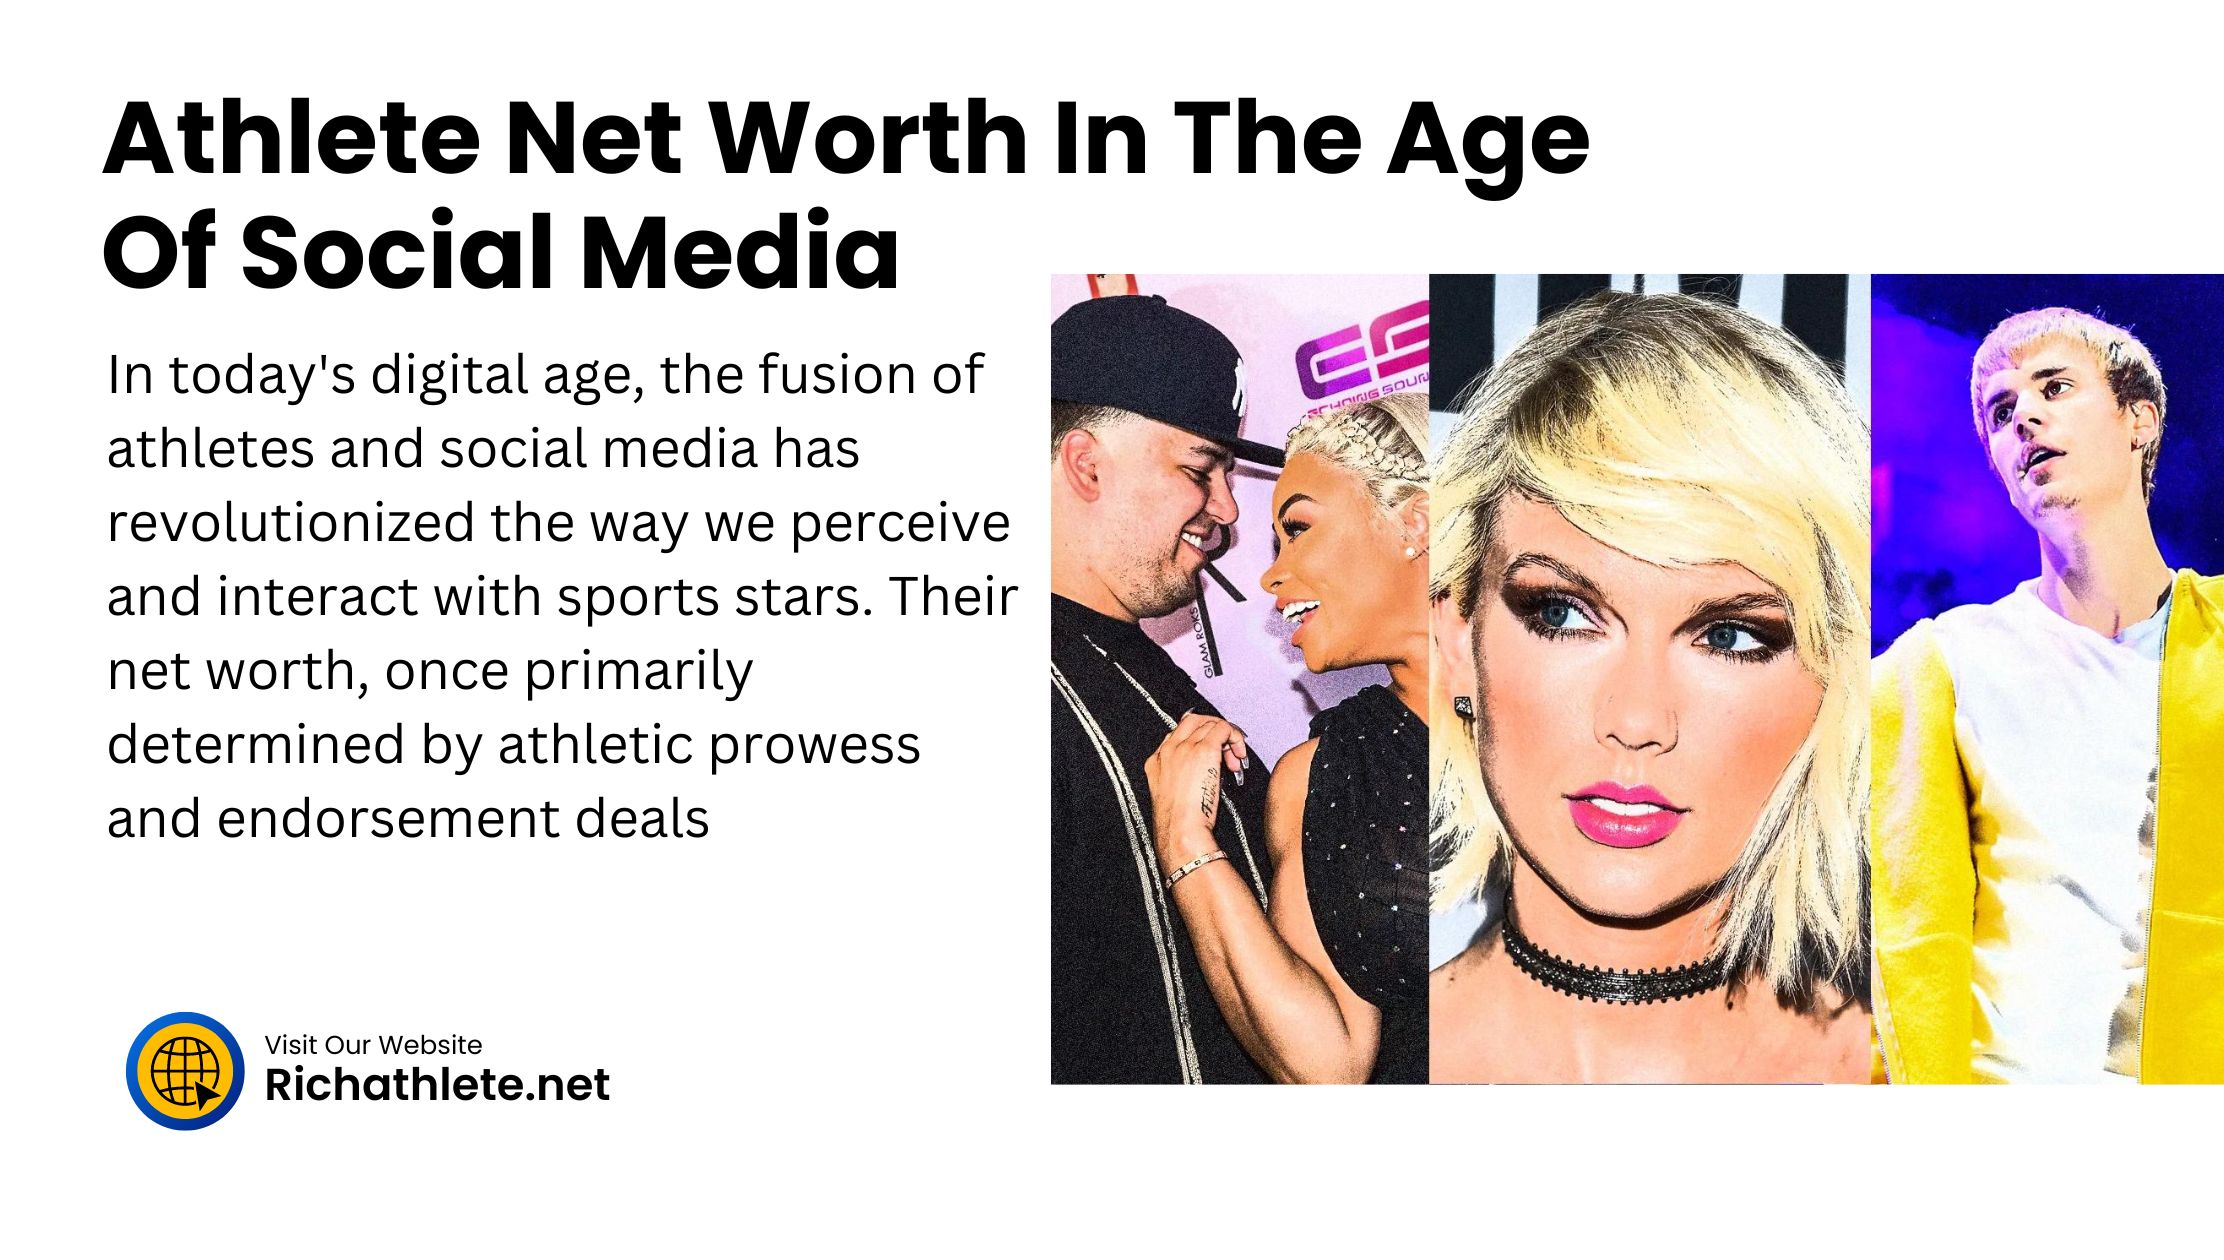 Athlete Net Worth In The Age Of Social Media